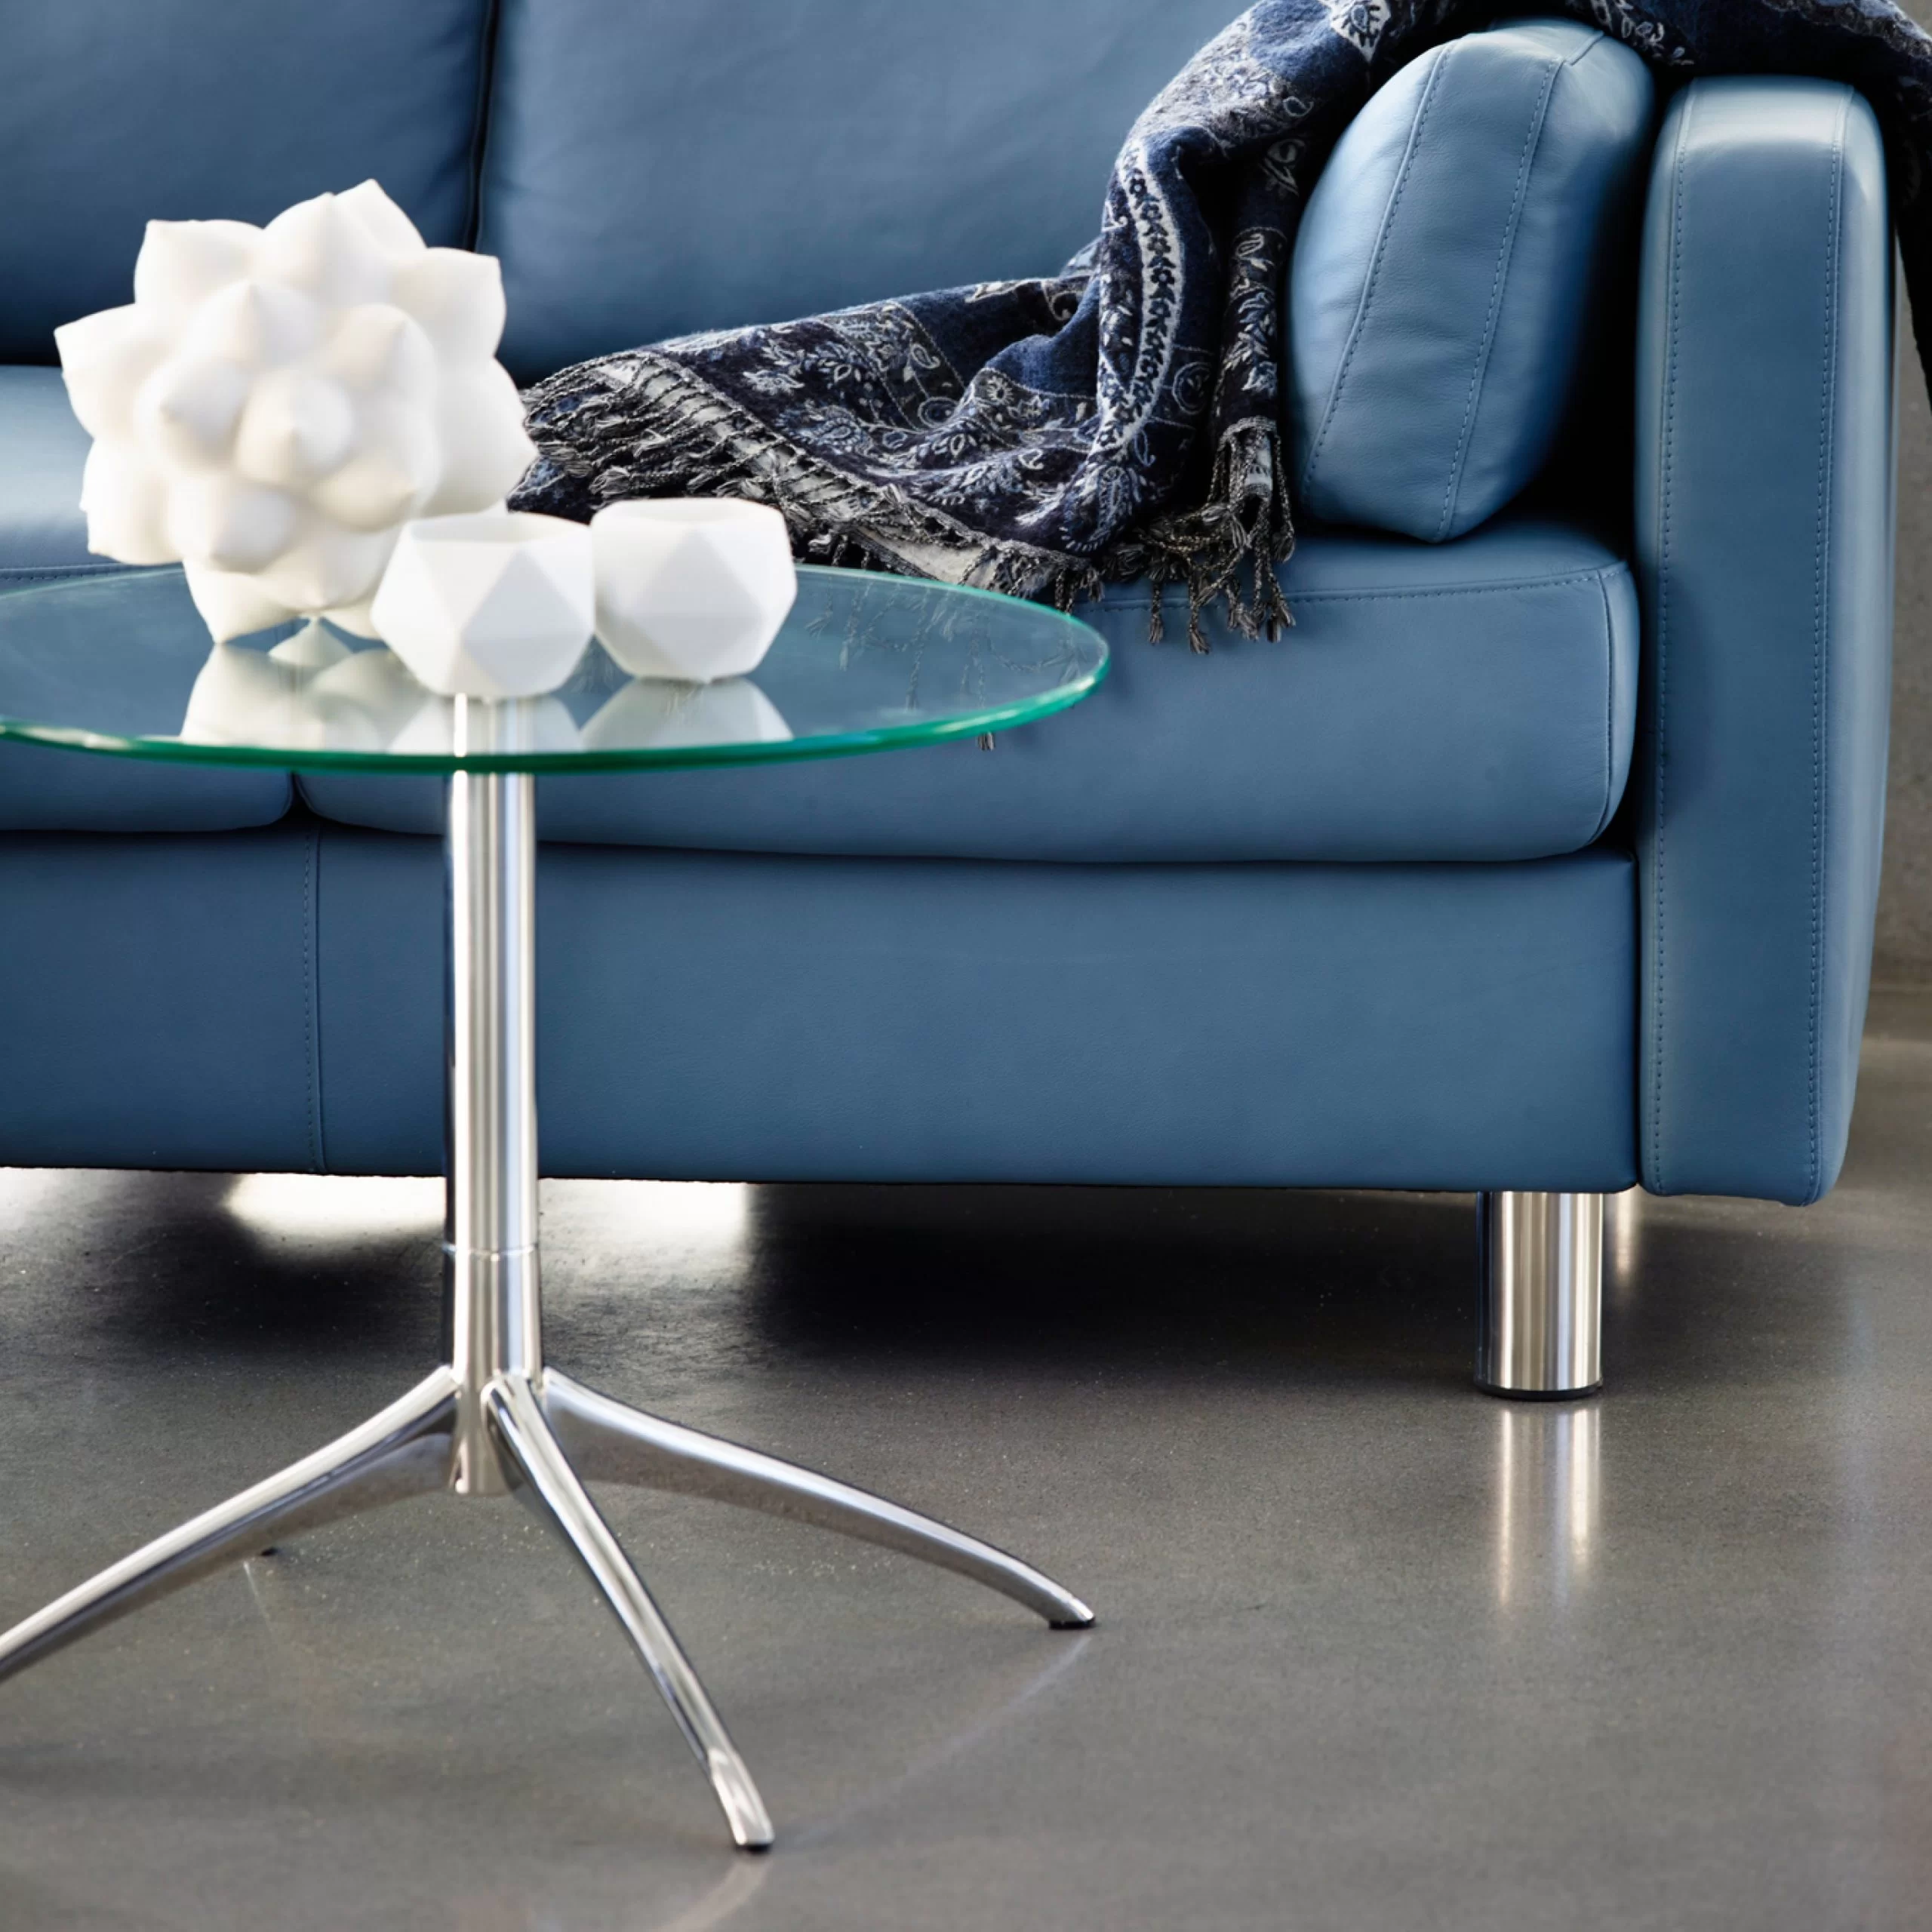 Stressless glass top side table | side tables adelaide